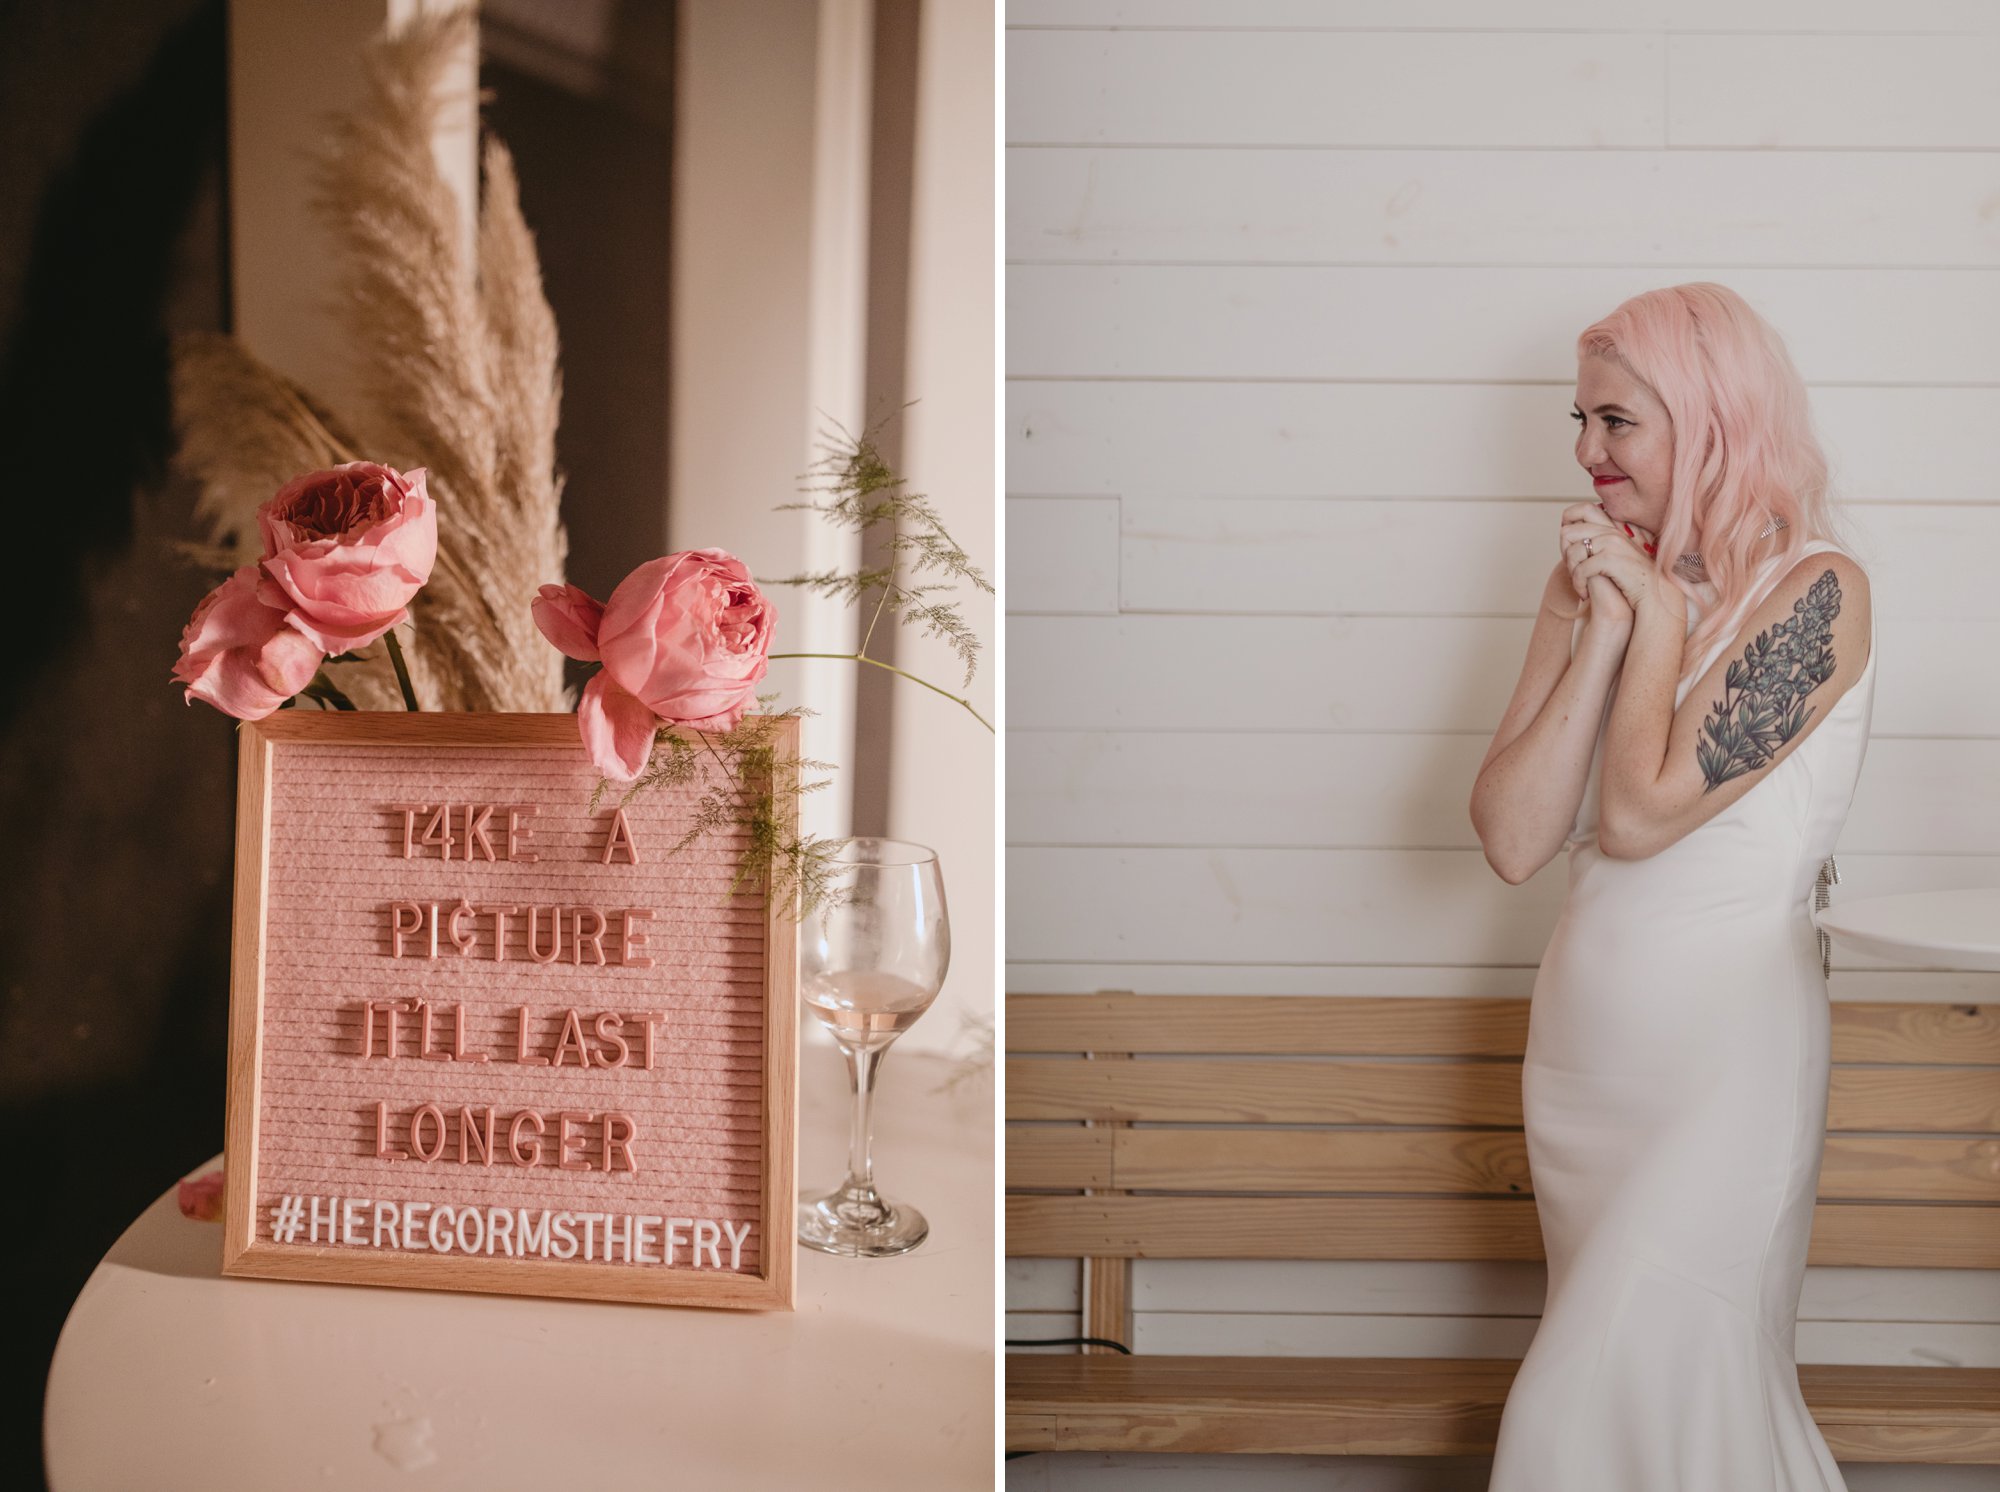 Bride with pink hair and groom in a purple suit prospect house wedding in austin tx with pastel decor and wild florals photo booth details